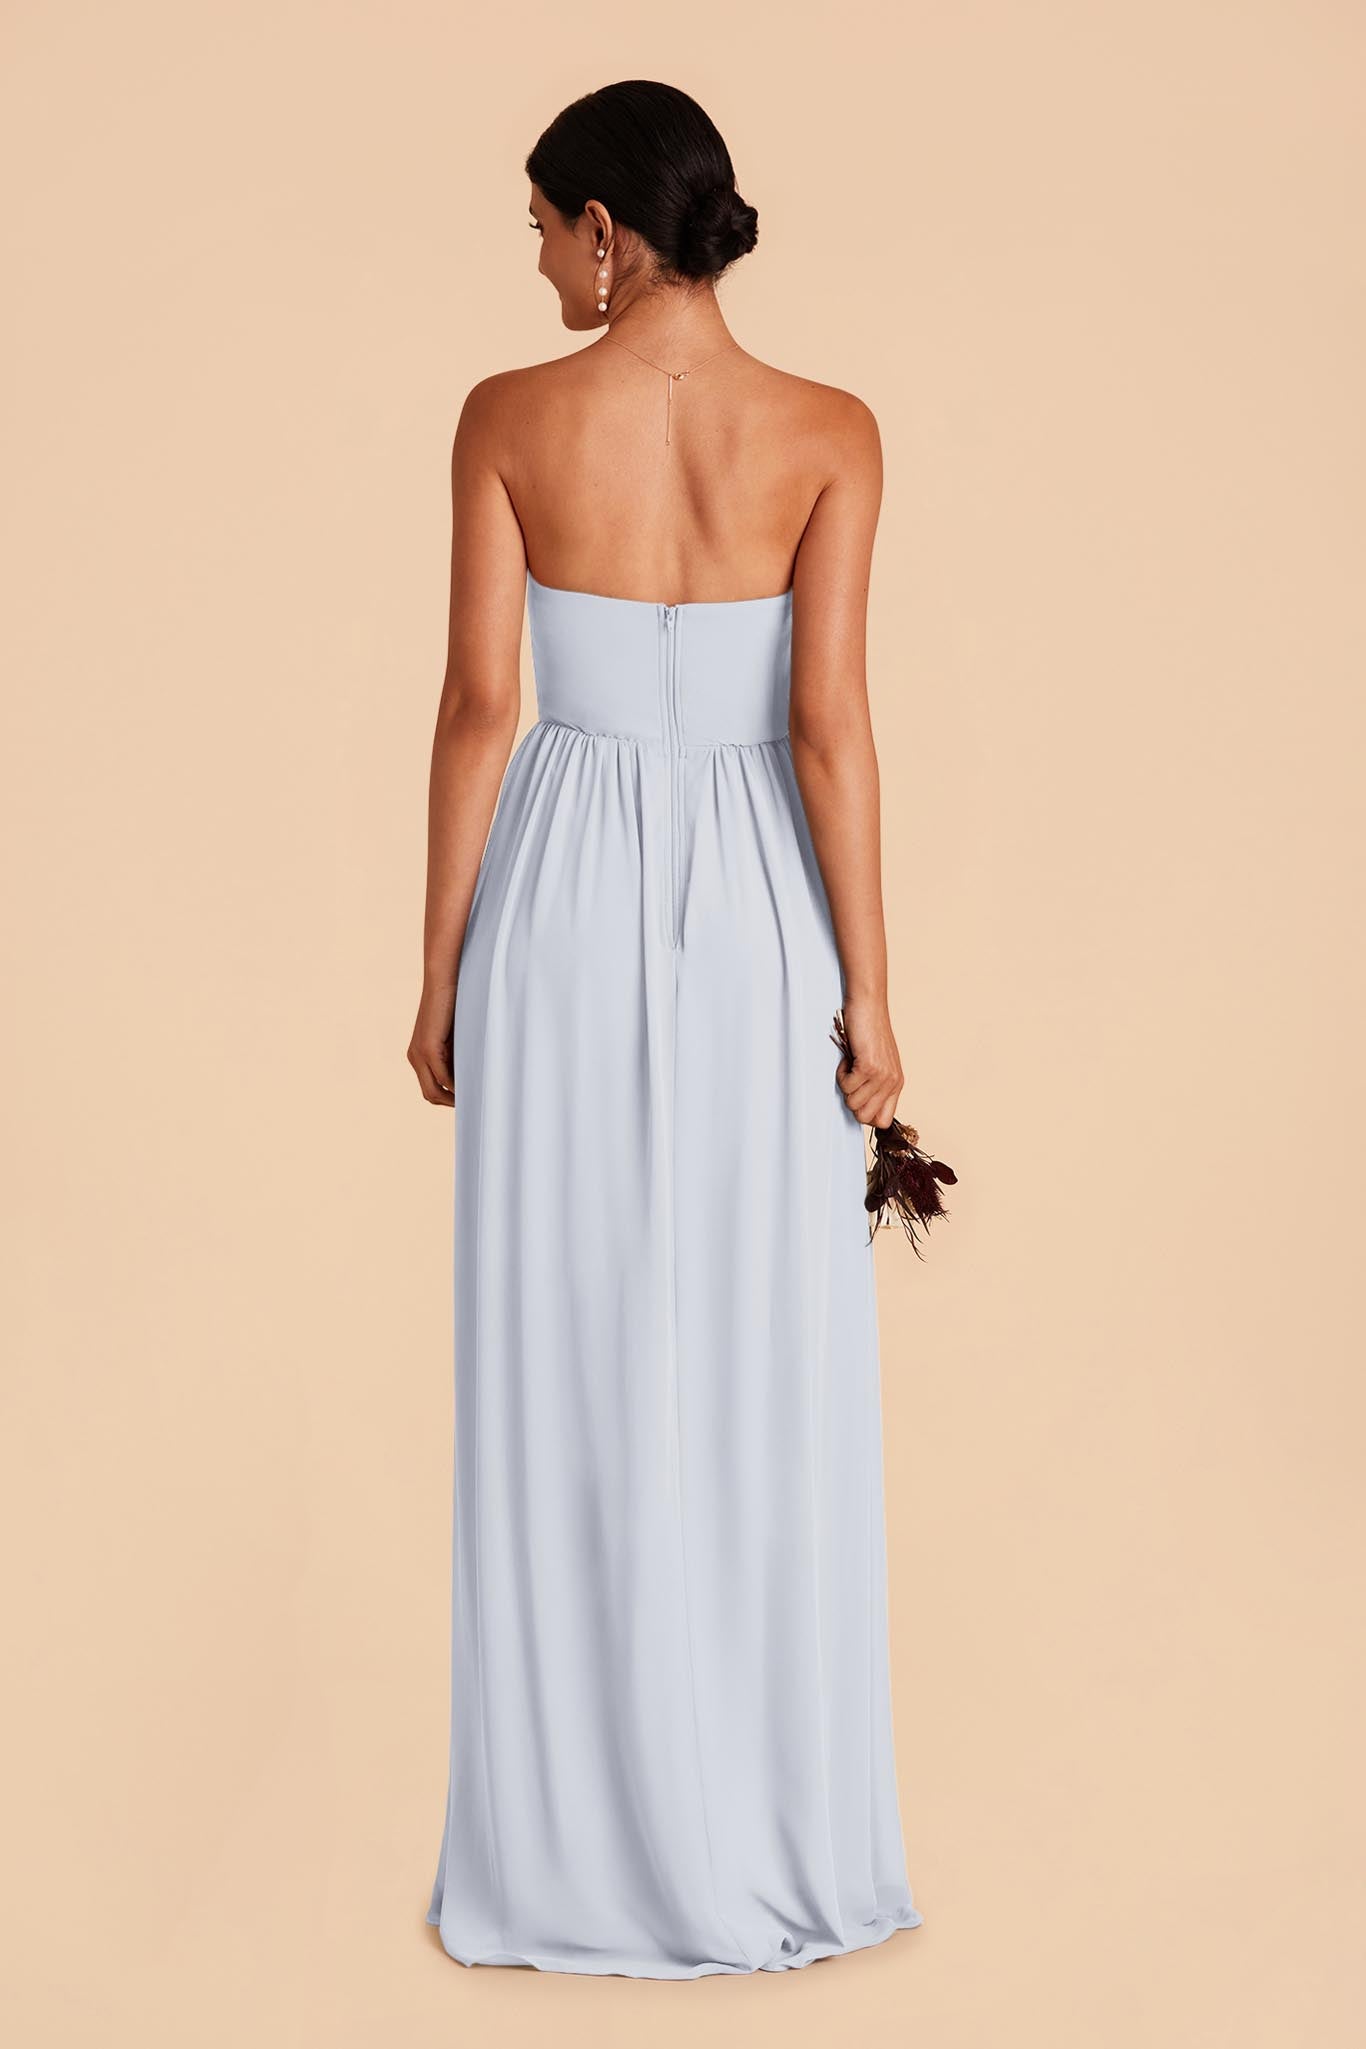 August Ice Blue Convertible Dress by Birdy Grey